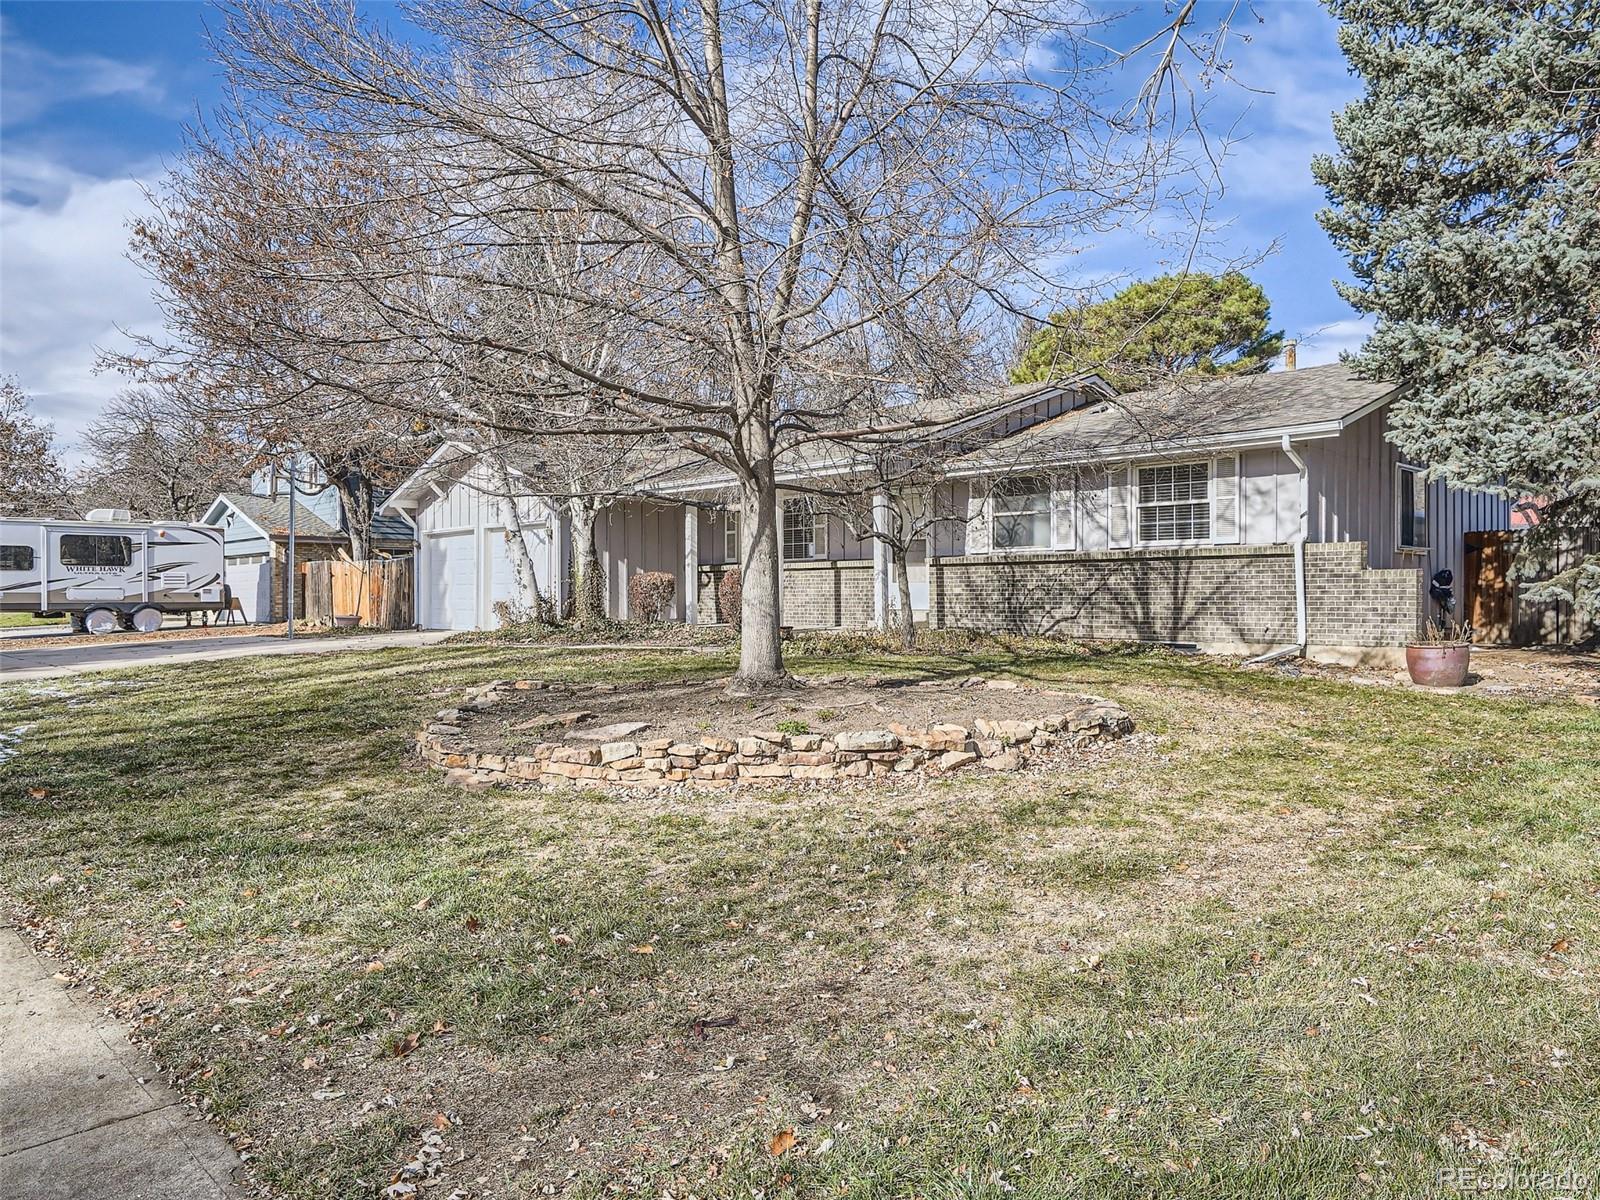 Report Image for 12165 W 68th Place,Arvada, Colorado